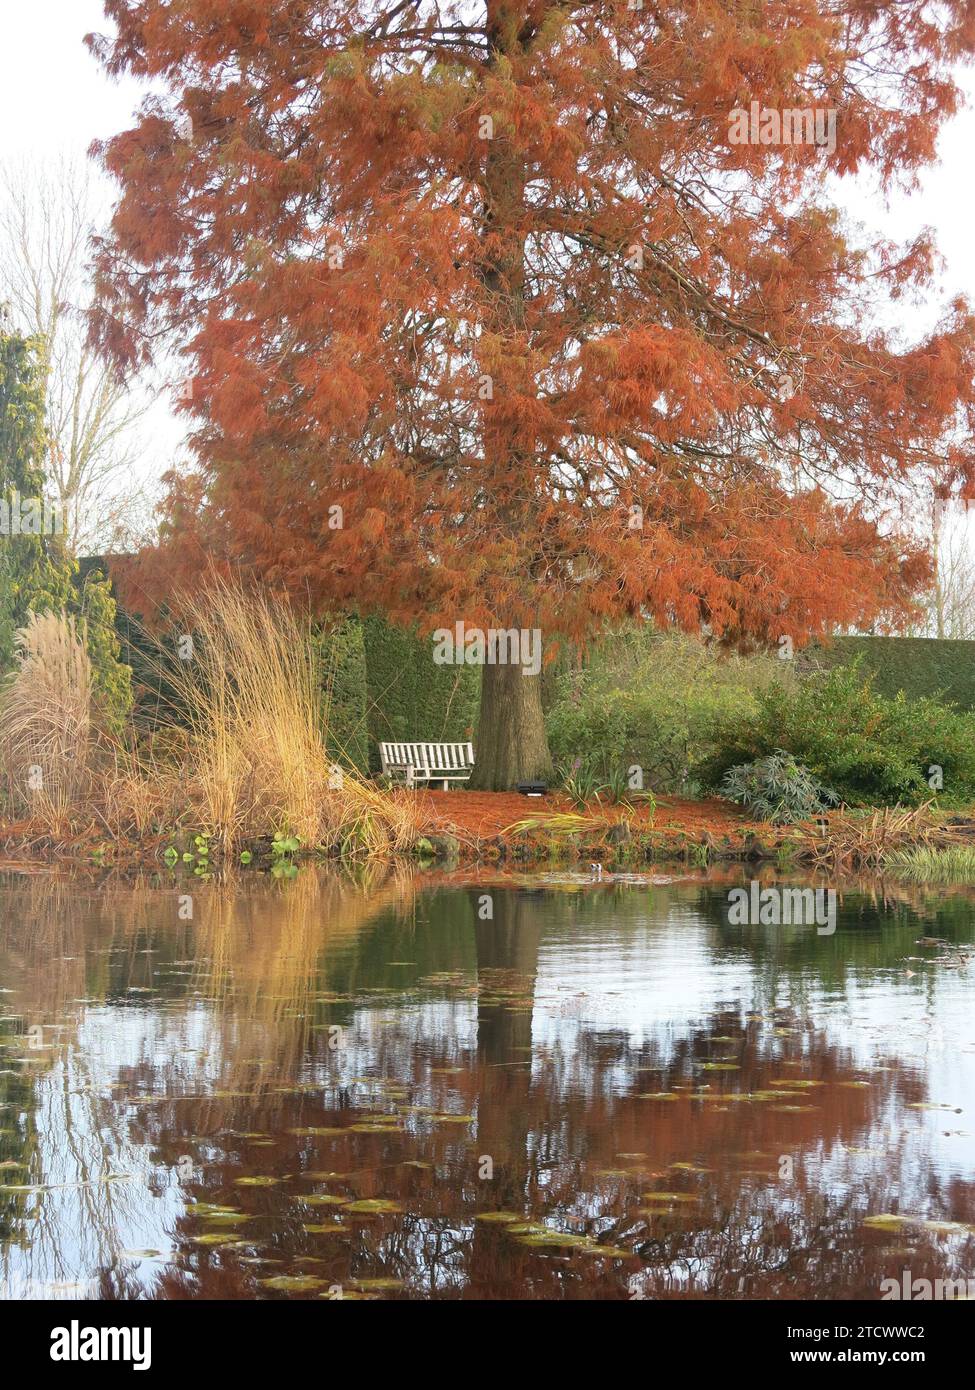 Winter reflections in the water: russet red foliage of the cypress tree Taxodium Distichum grown at the water's edge in the gardens at RHS Hyde Hall. Stock Photo